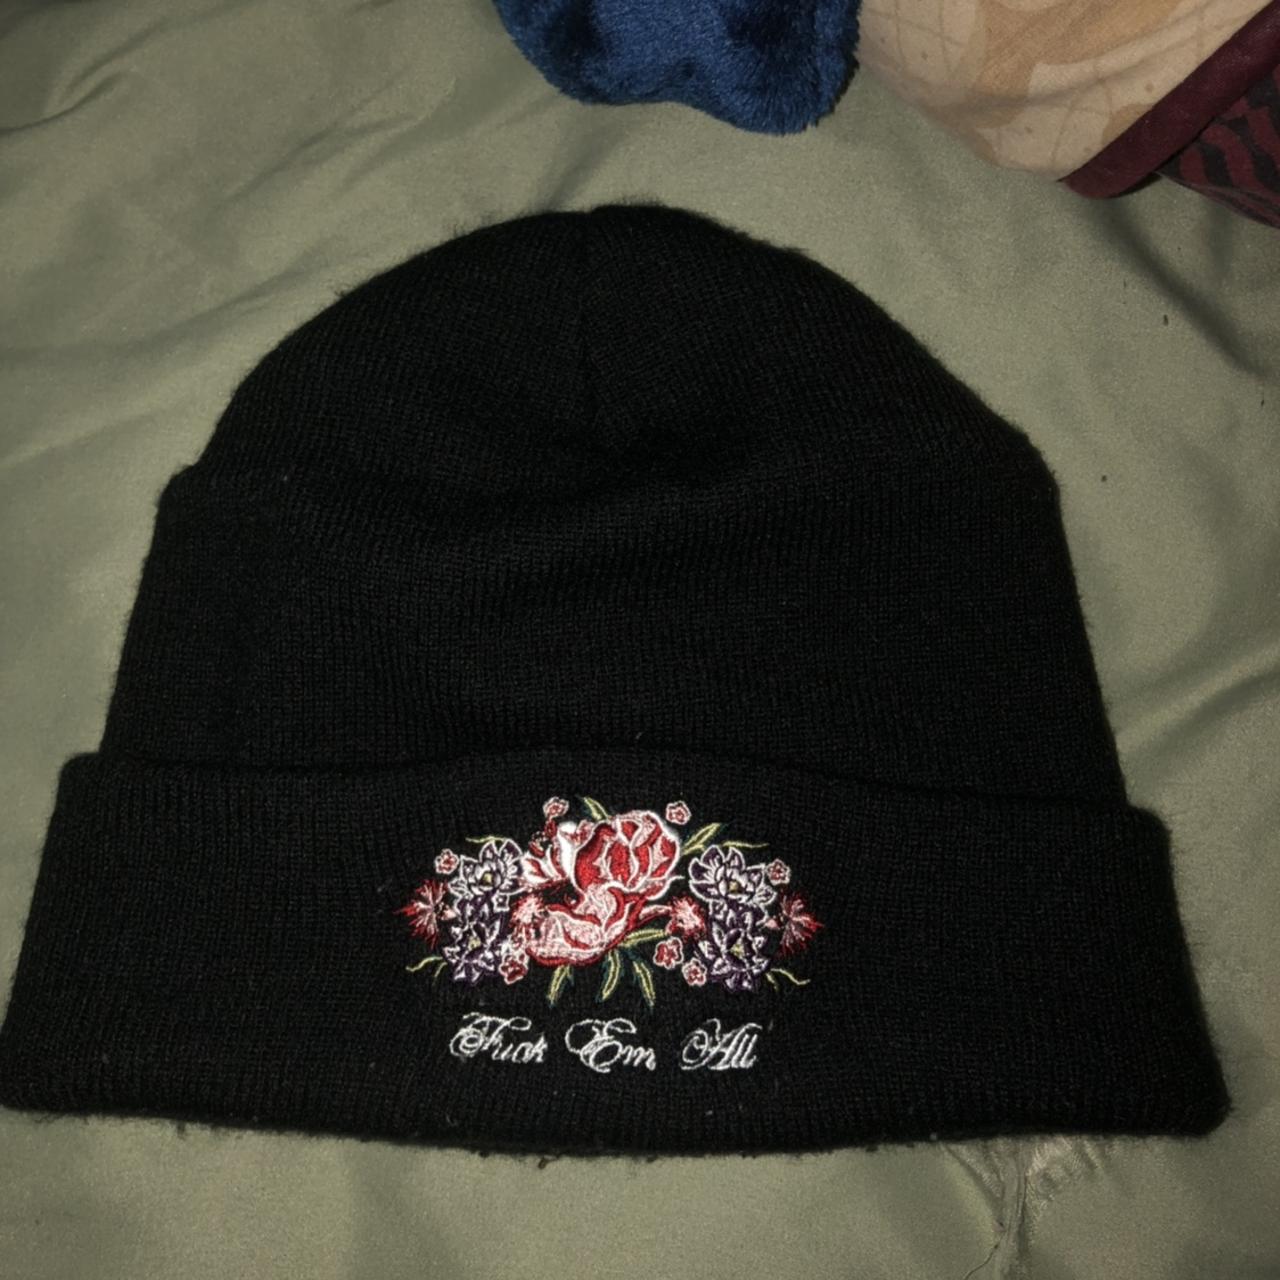 AprilroofsSupreme Fuck All Y'all Beanie2